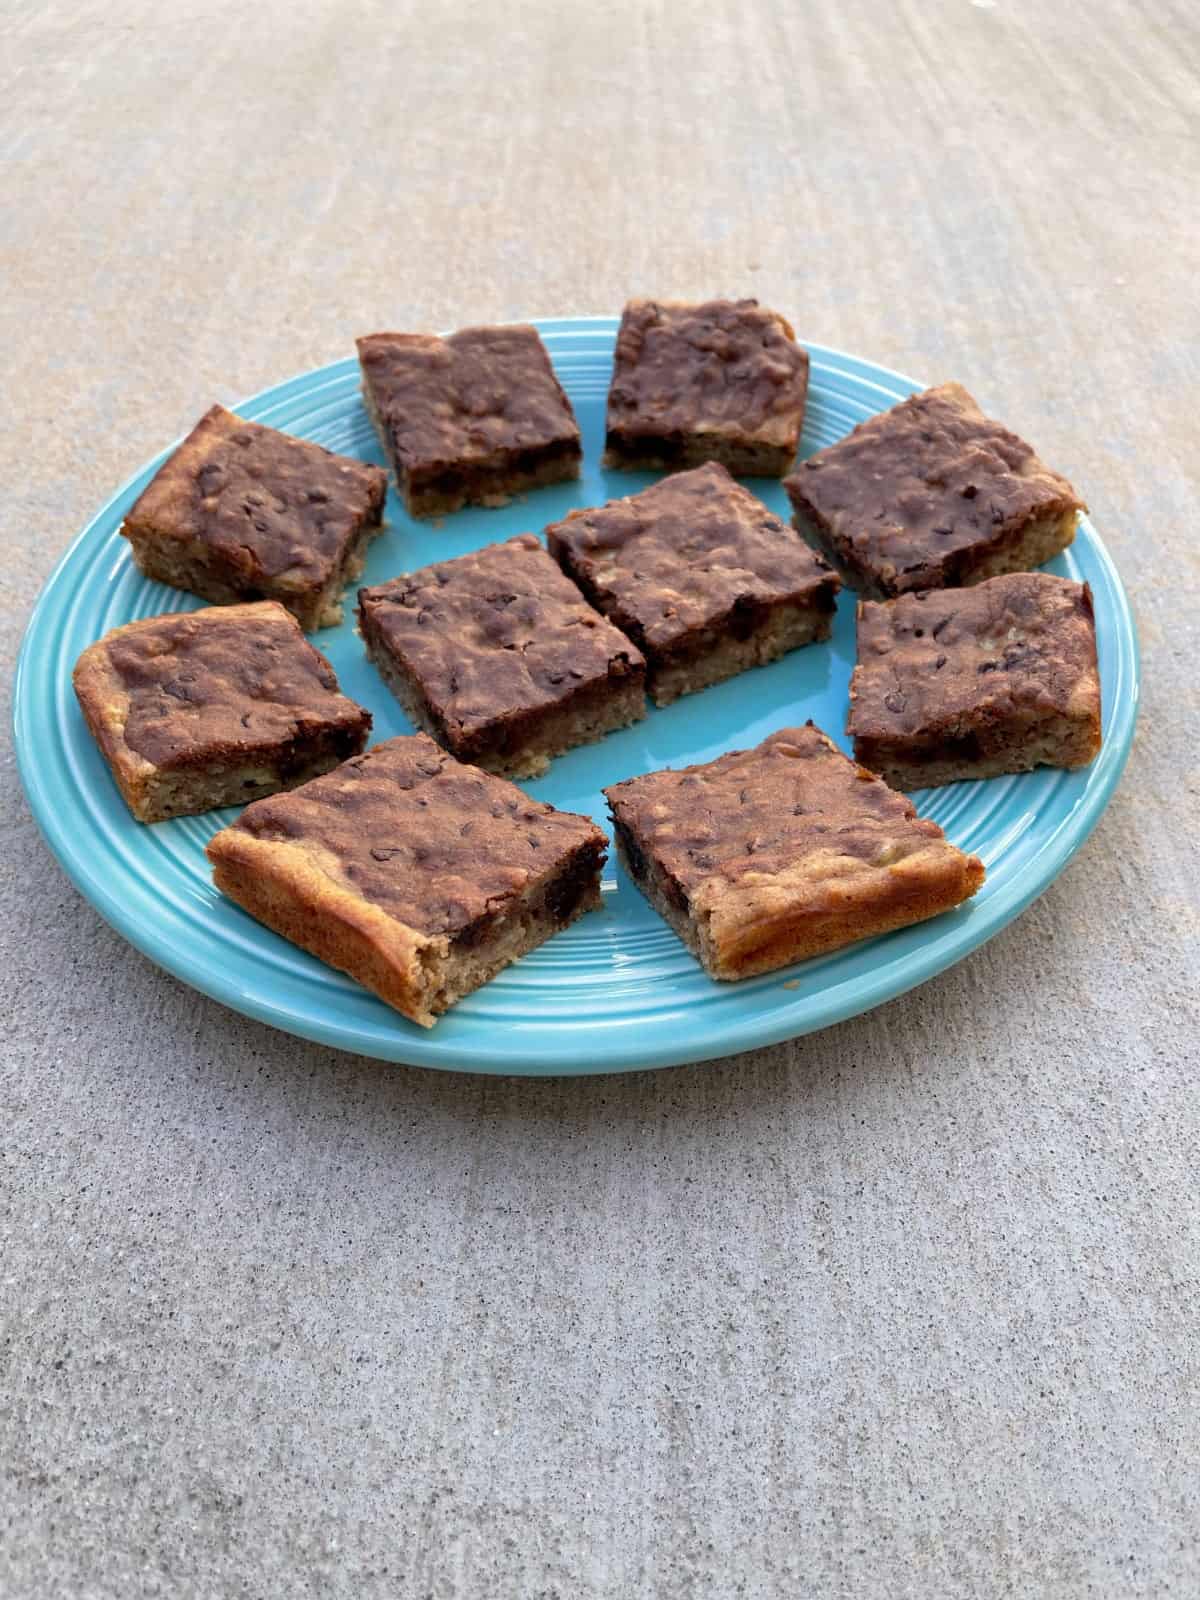 Banana bread brownies on large green plate.